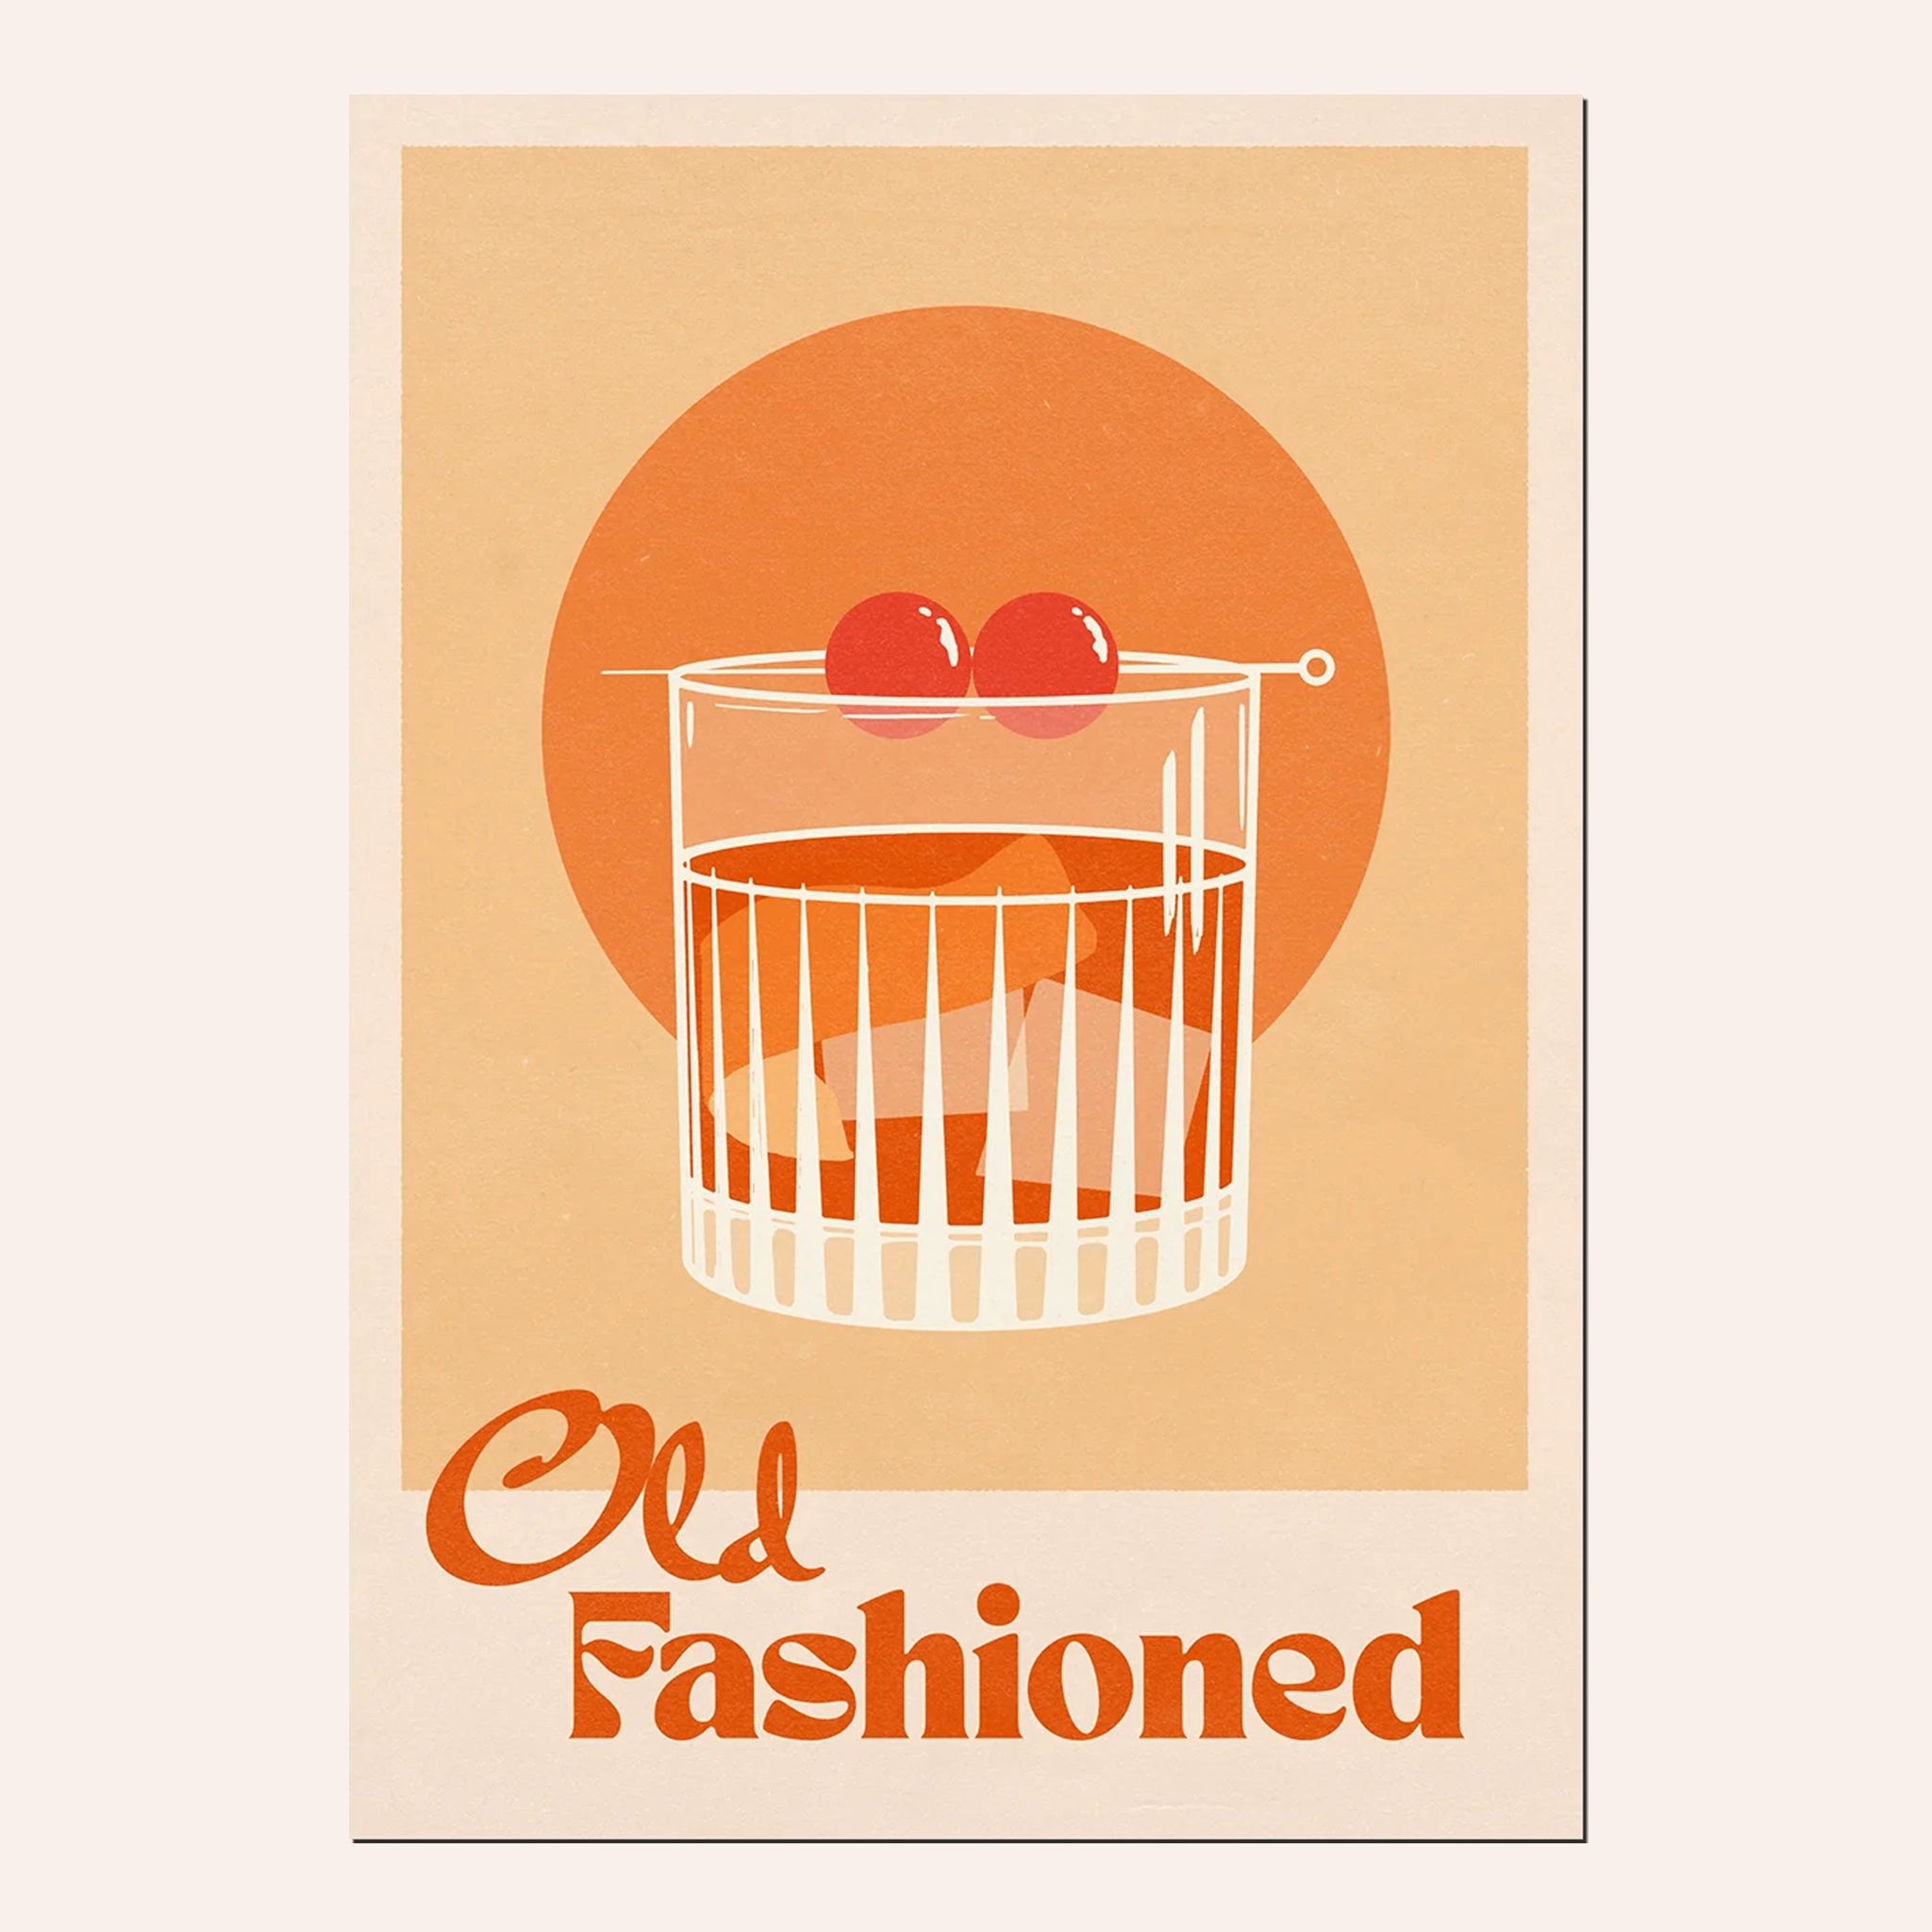 On a white background is an orange art print with an ivory border and a graphic of an old fashioned cocktail and orange text that reads, "Old Fashioned".